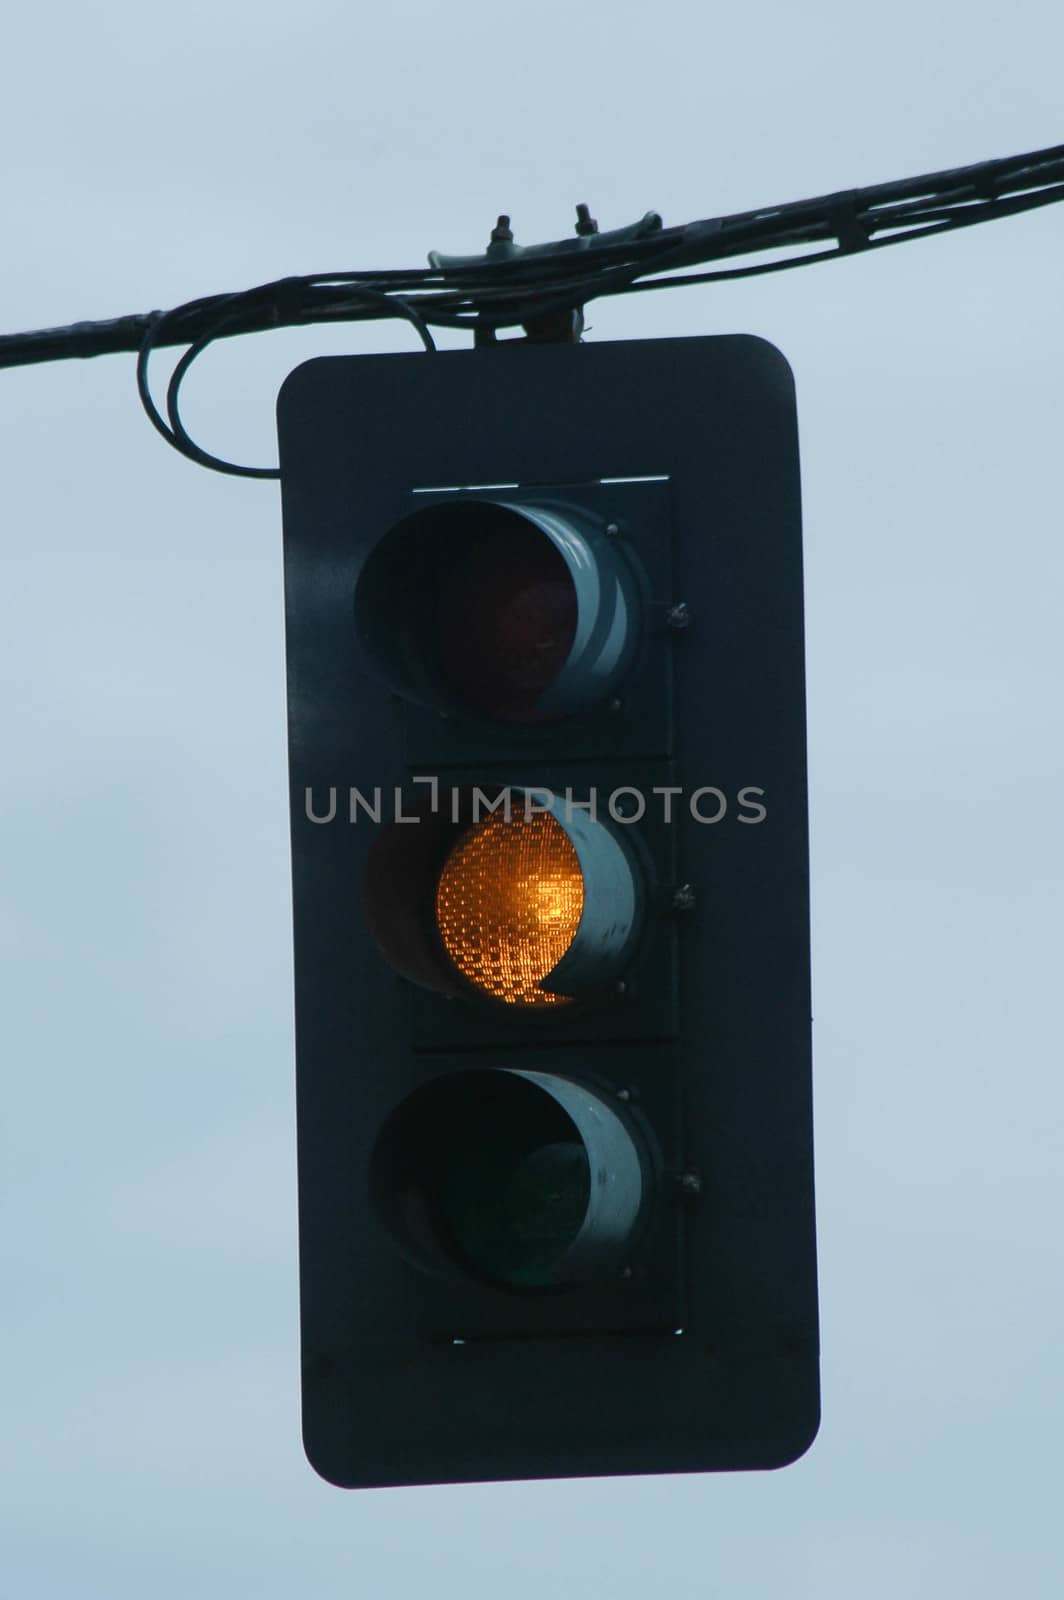 Traffic Light directing motorists and pedestrians to use caution